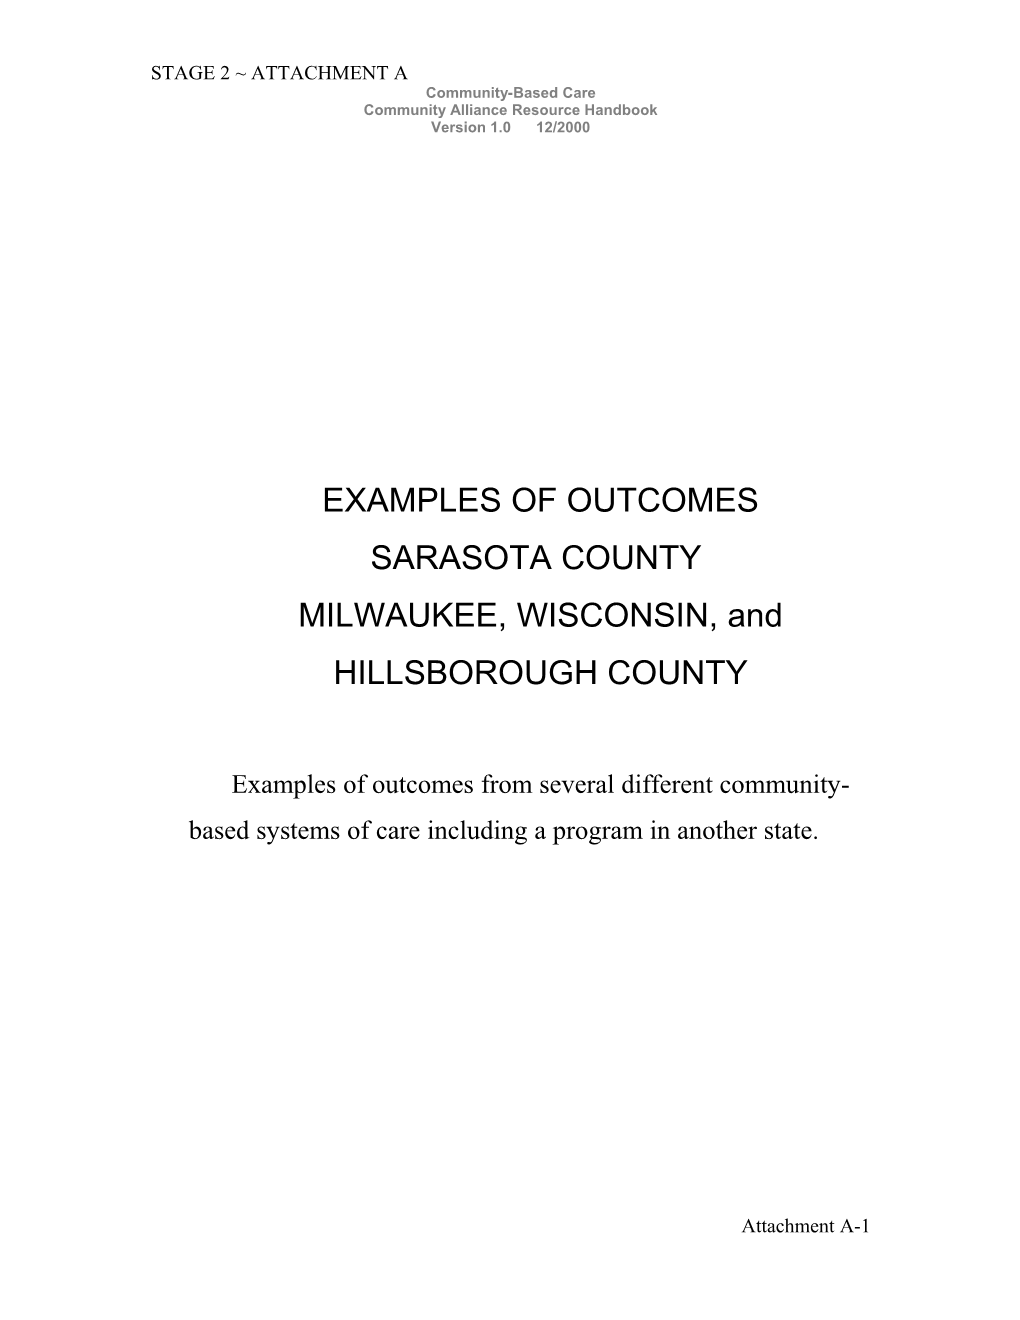 Examples of Outcomes